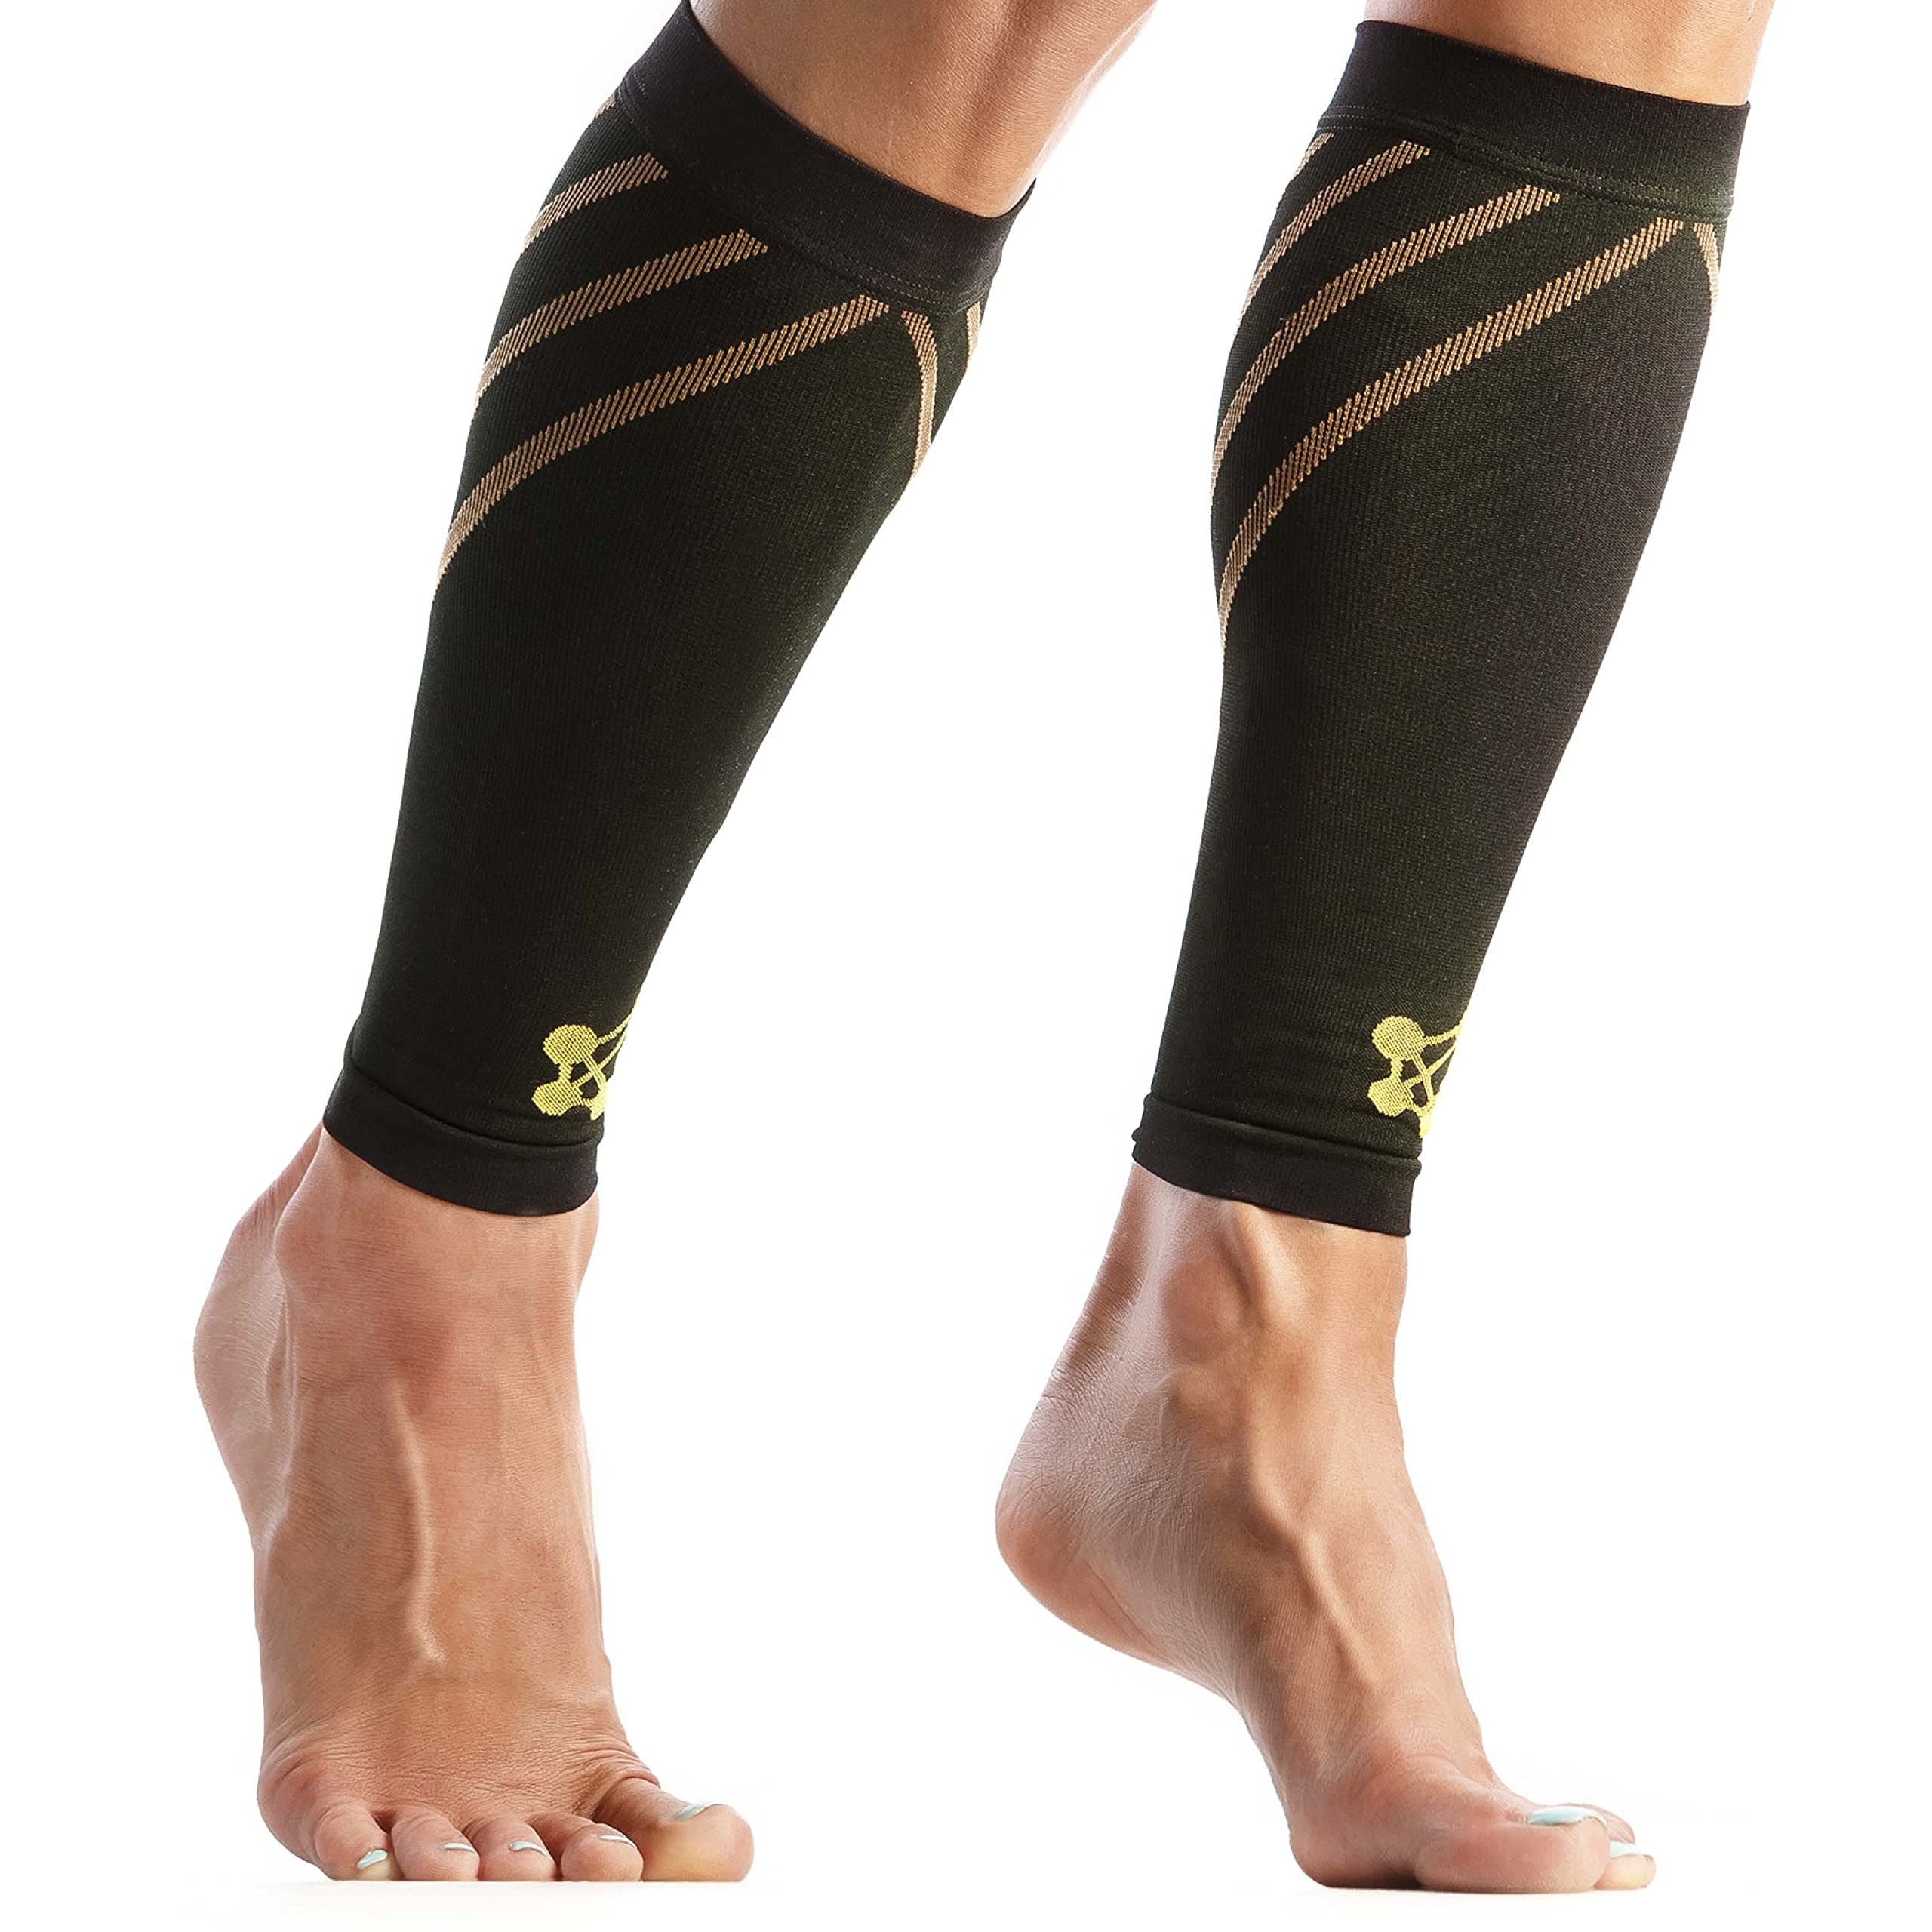 Womens Reflective Compression Calf Sleeves 20-30mmHg